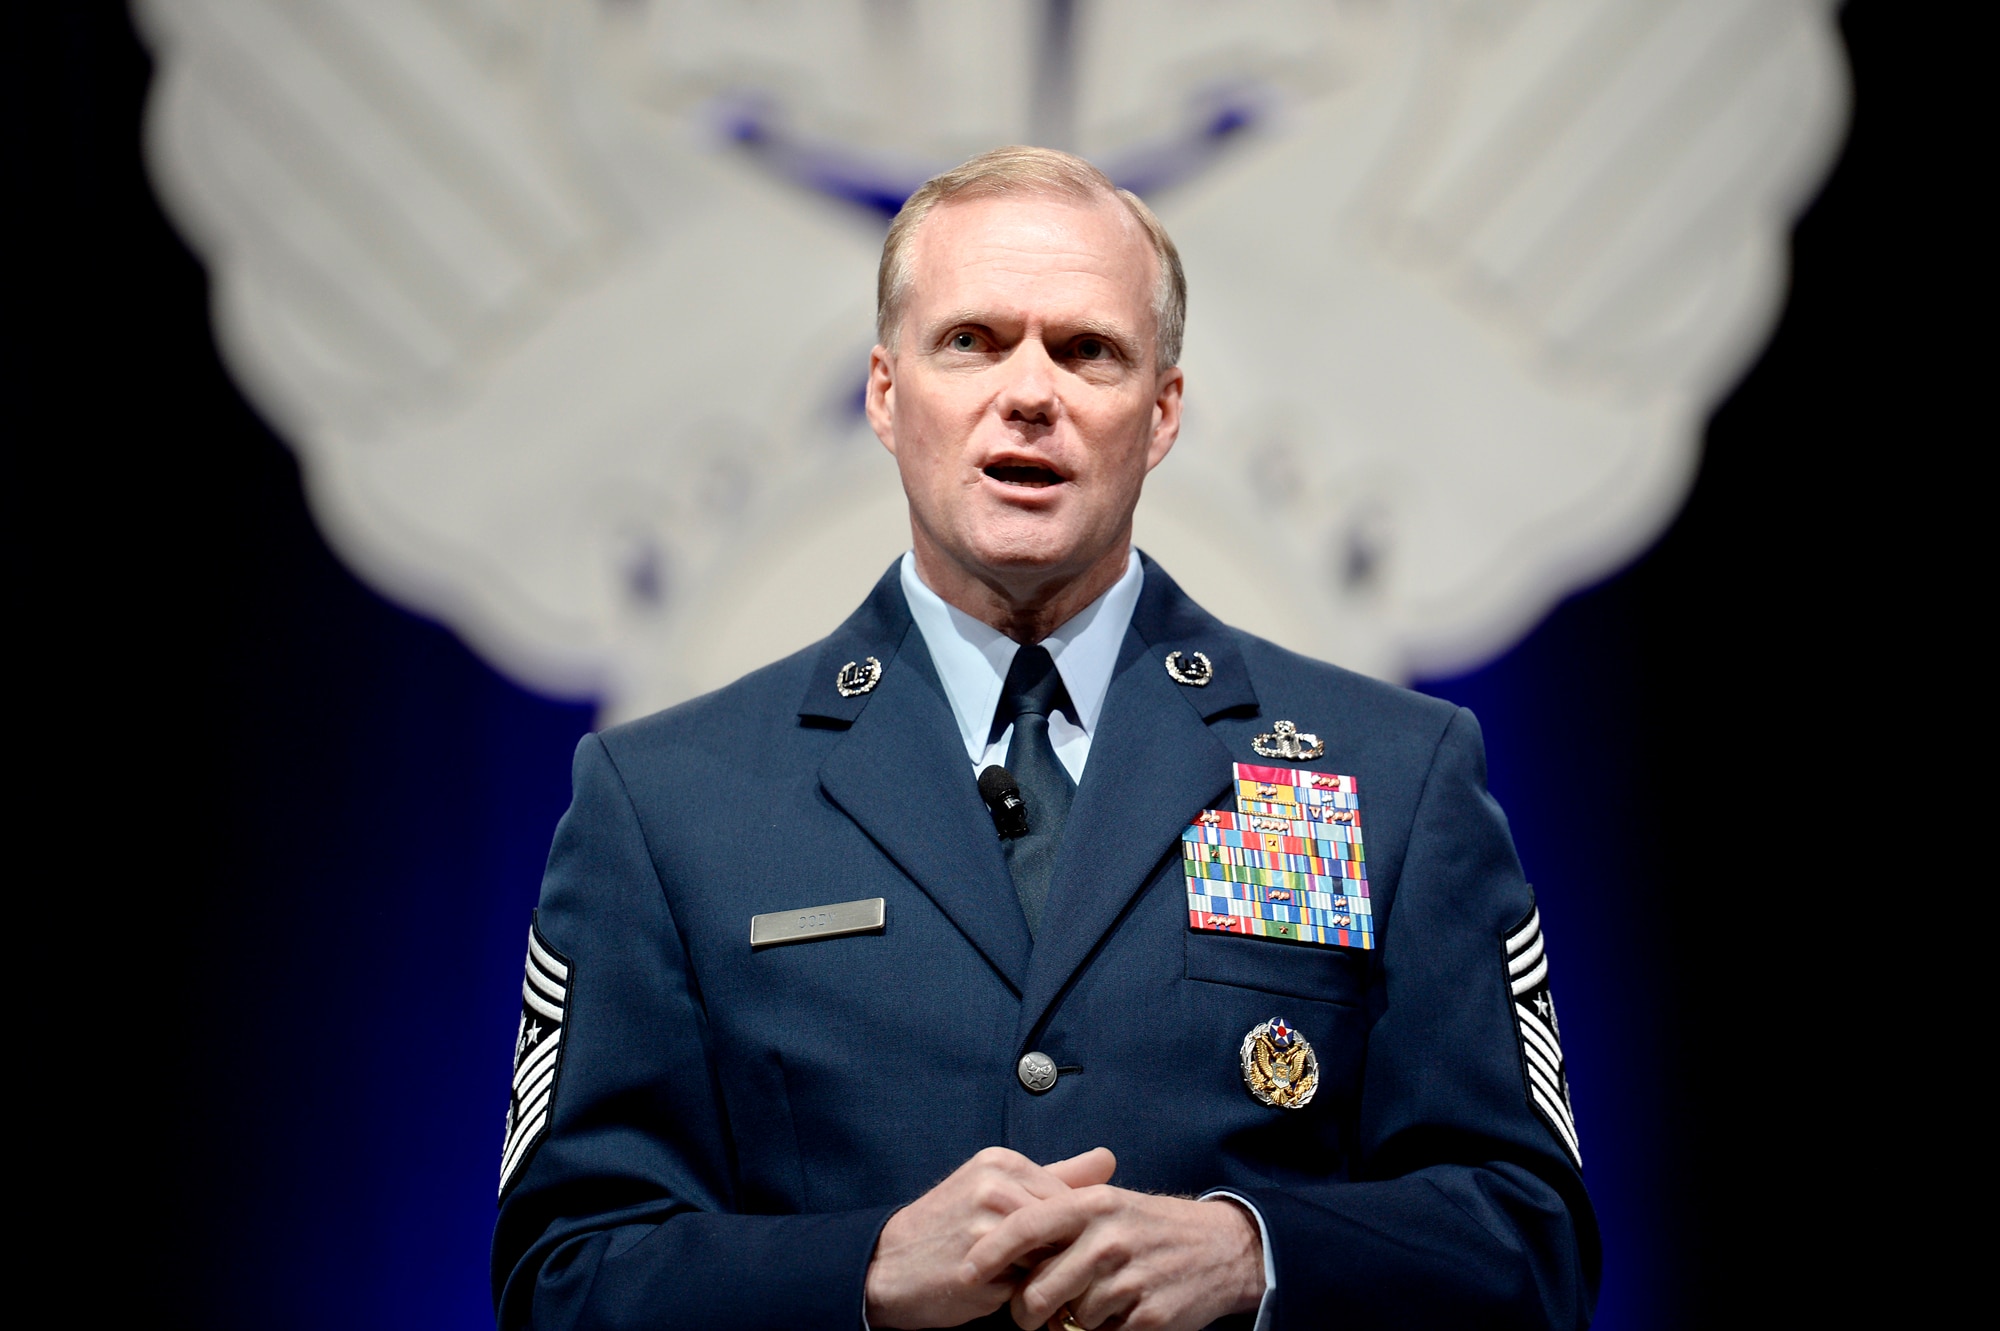 Chief Master Sgt. of the Air Force James A. Cody gives his enlisted perspective during the Air Force Association's Air Warfare Symposium in Orlando, Fla., Feb. 25, 2016.  (U.S. Air Force photo/Scott M. Ash)